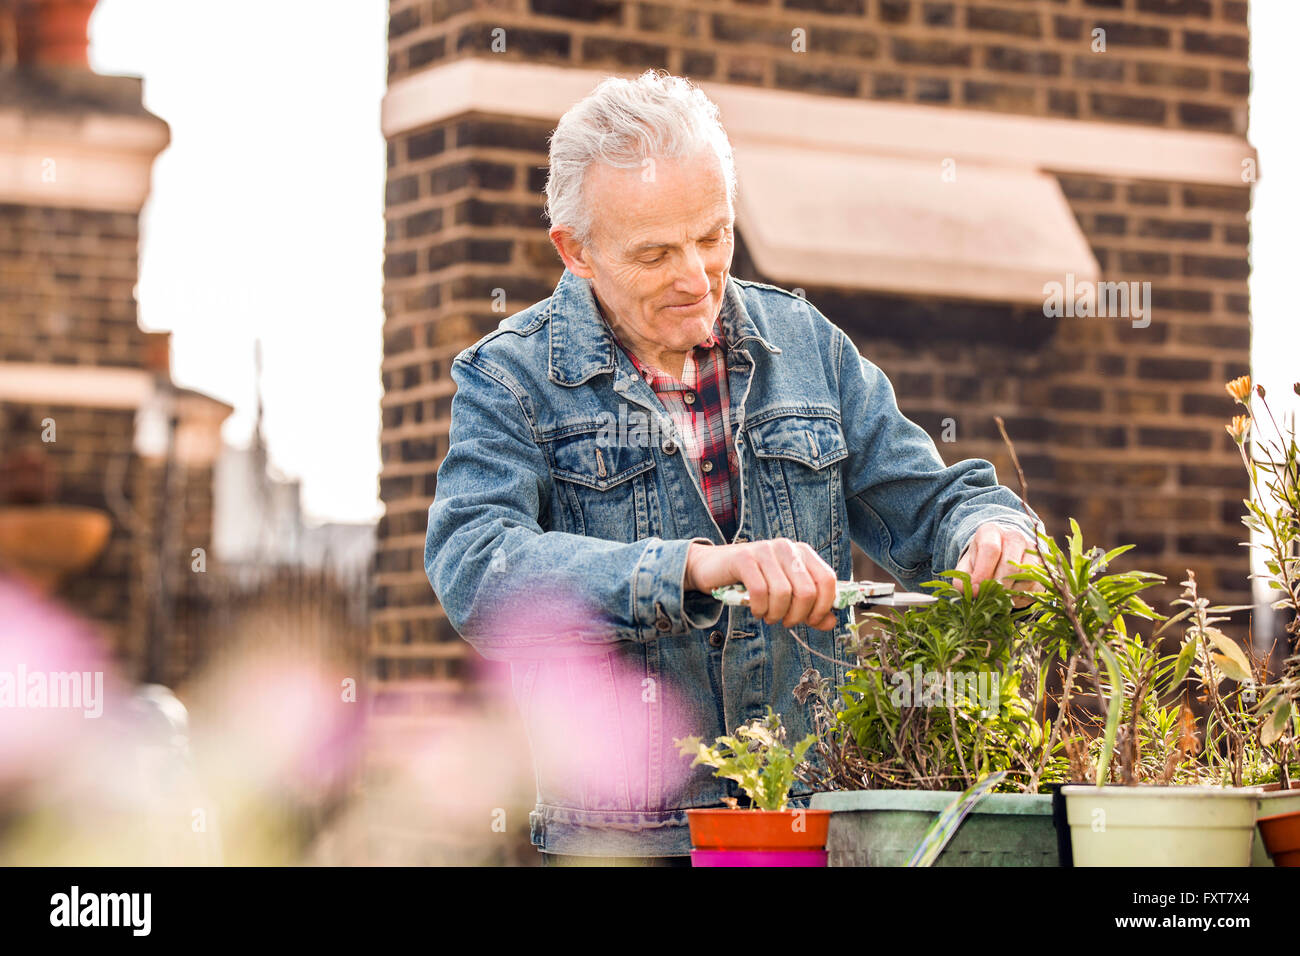 Senior man pruning potted plants on city rooftop garden Stock Photo